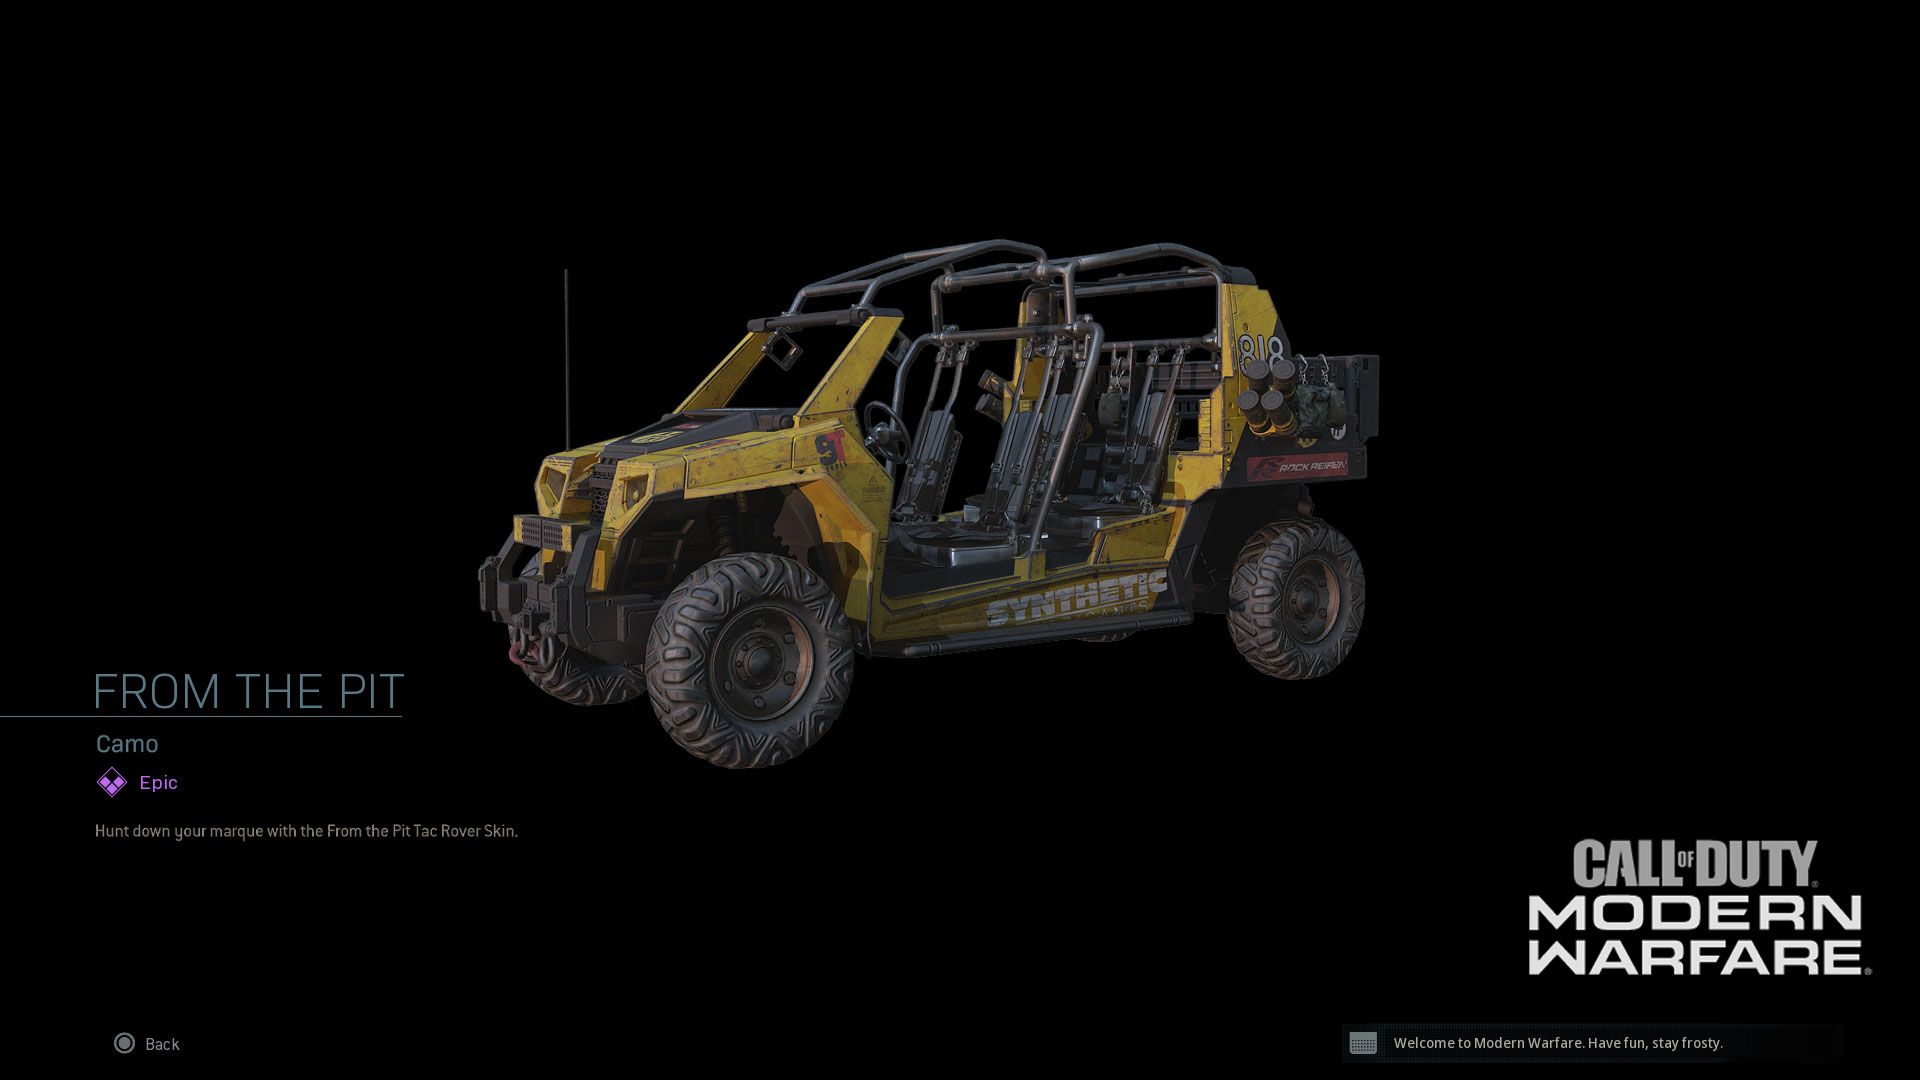 How to Customize Your Call of Duty®: Modern Warfare® Ride with Vehicle Skins